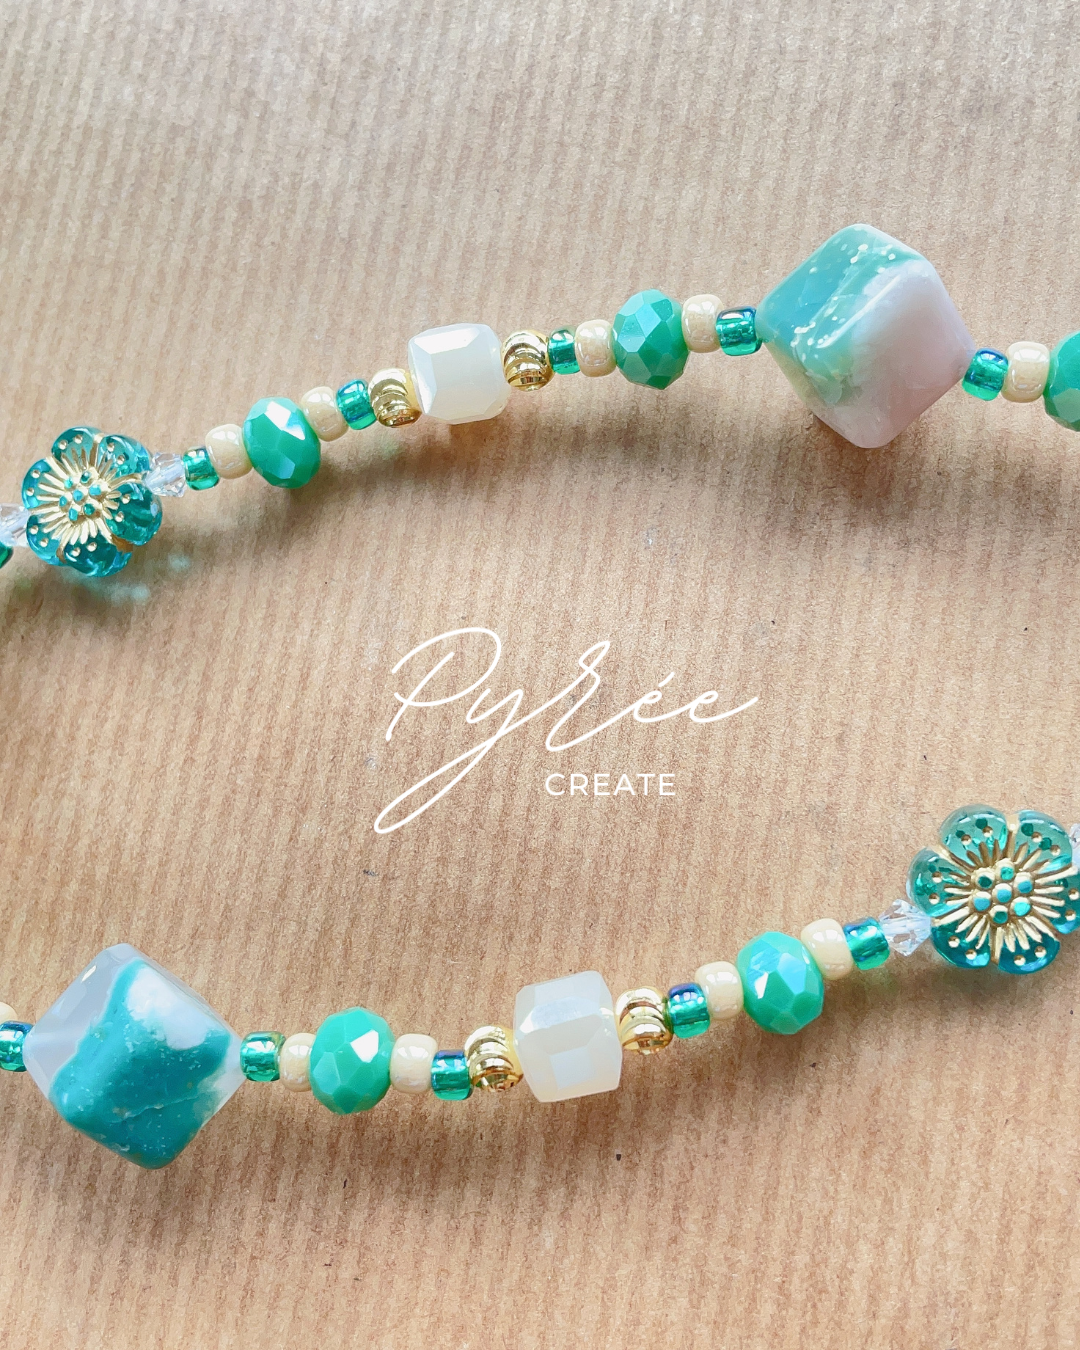 [One & Only] The Painting in Green - Green Flower Agate